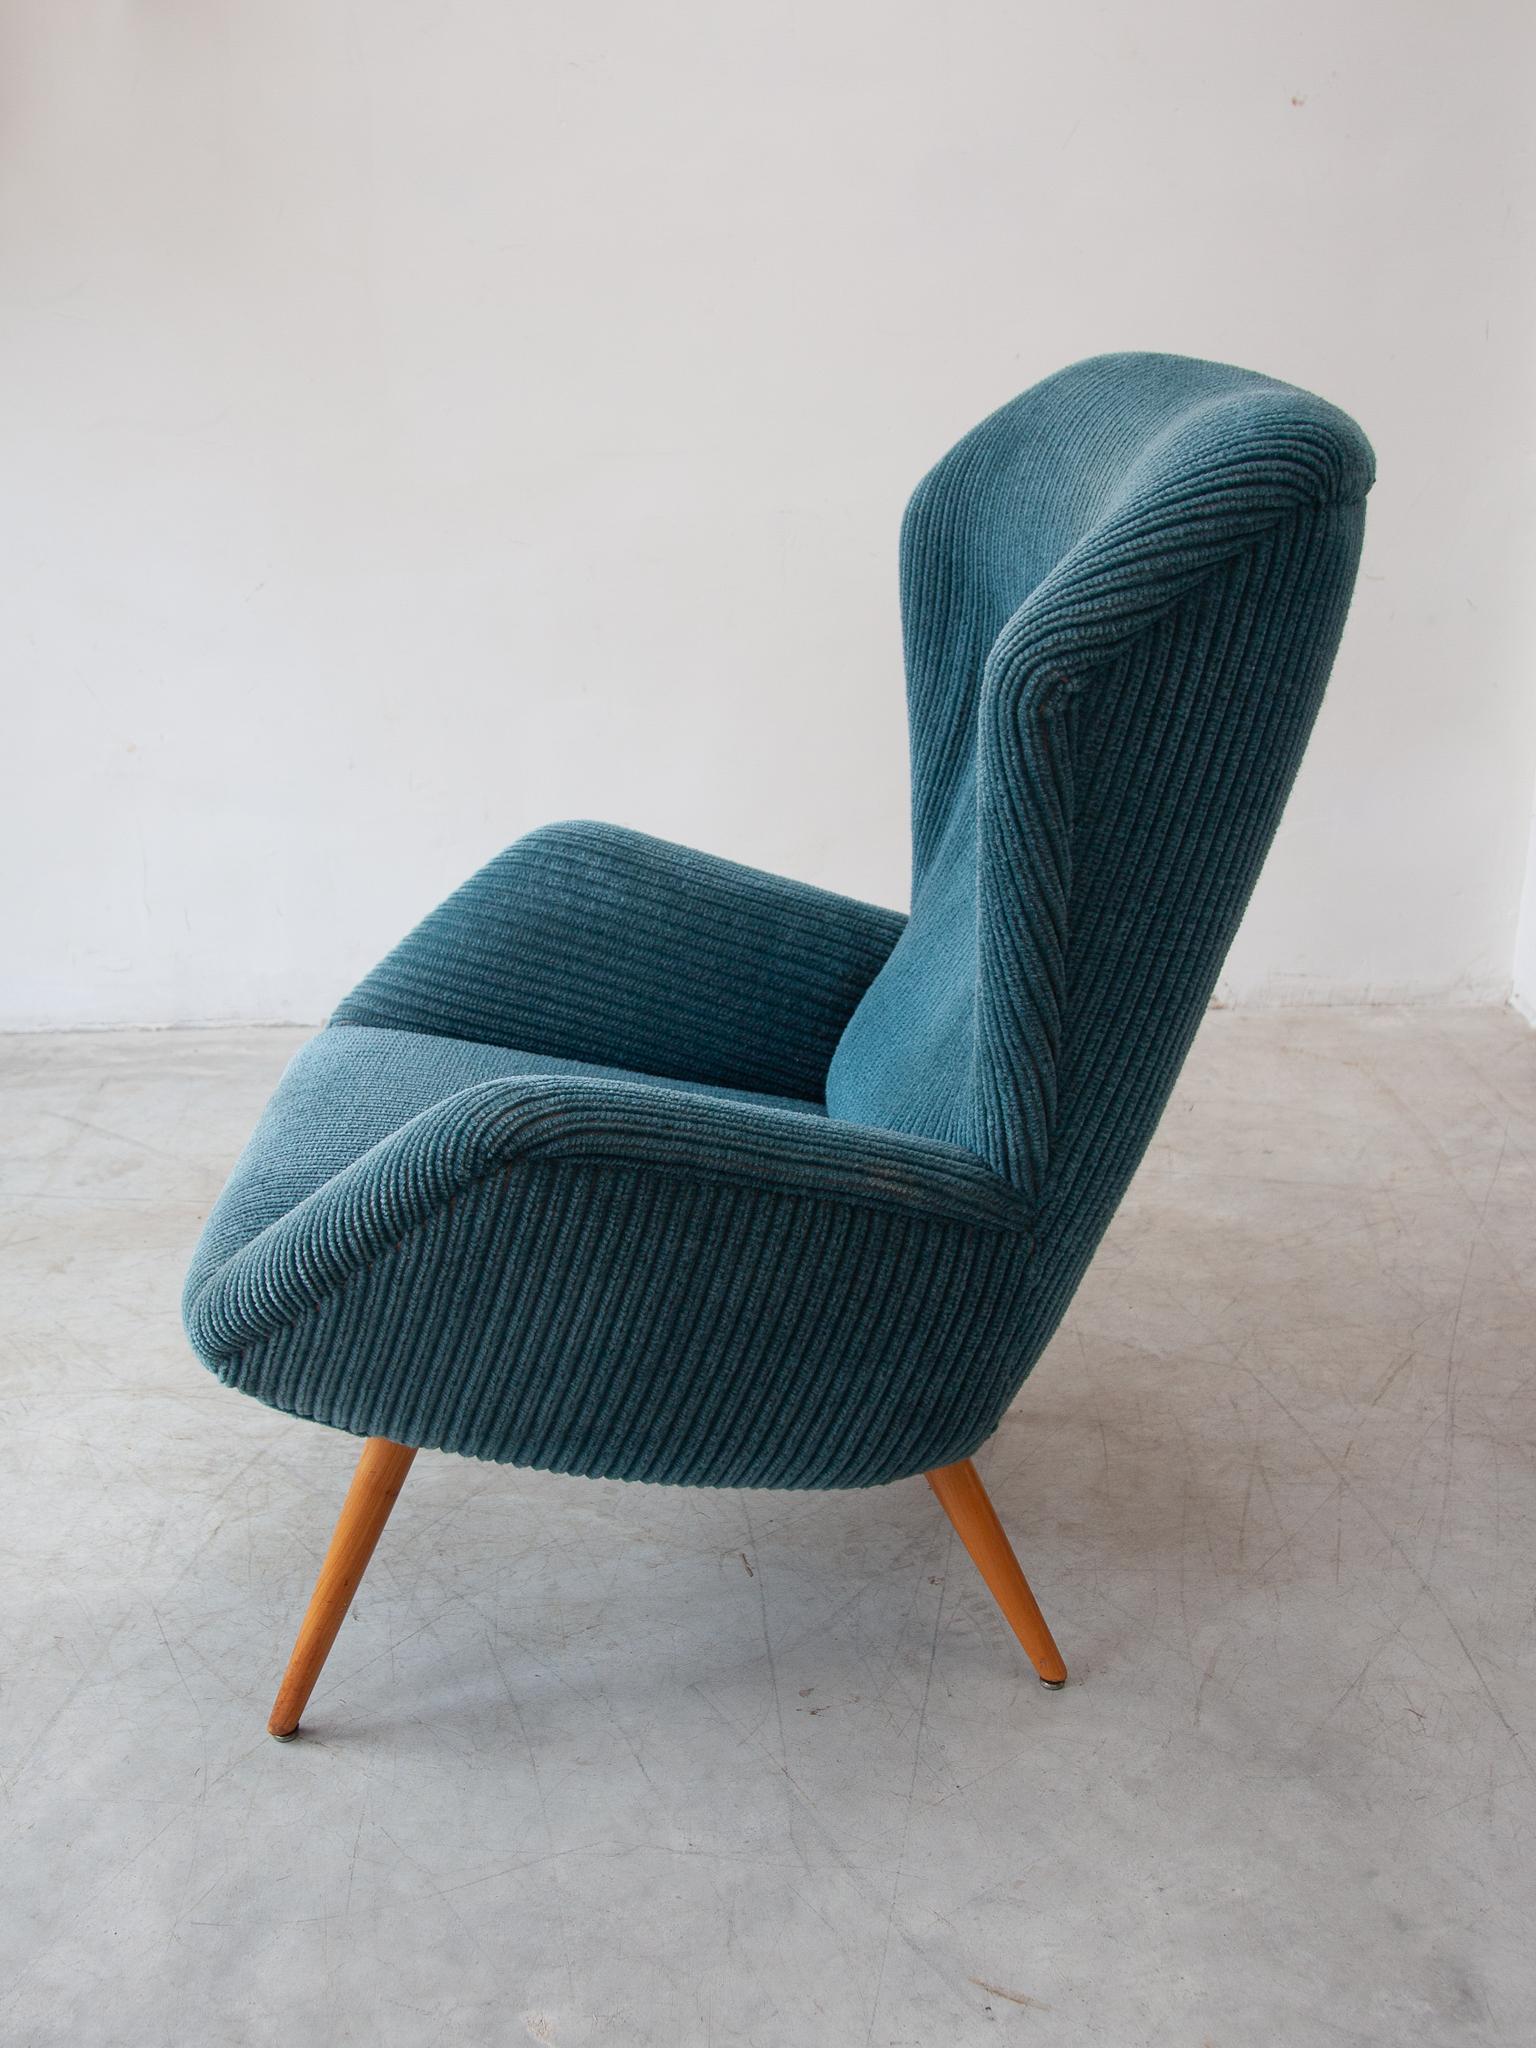 Hand-Crafted High Wingback Lounge Chair, Germany designed by Ernst Jahn, 1950s For Sale